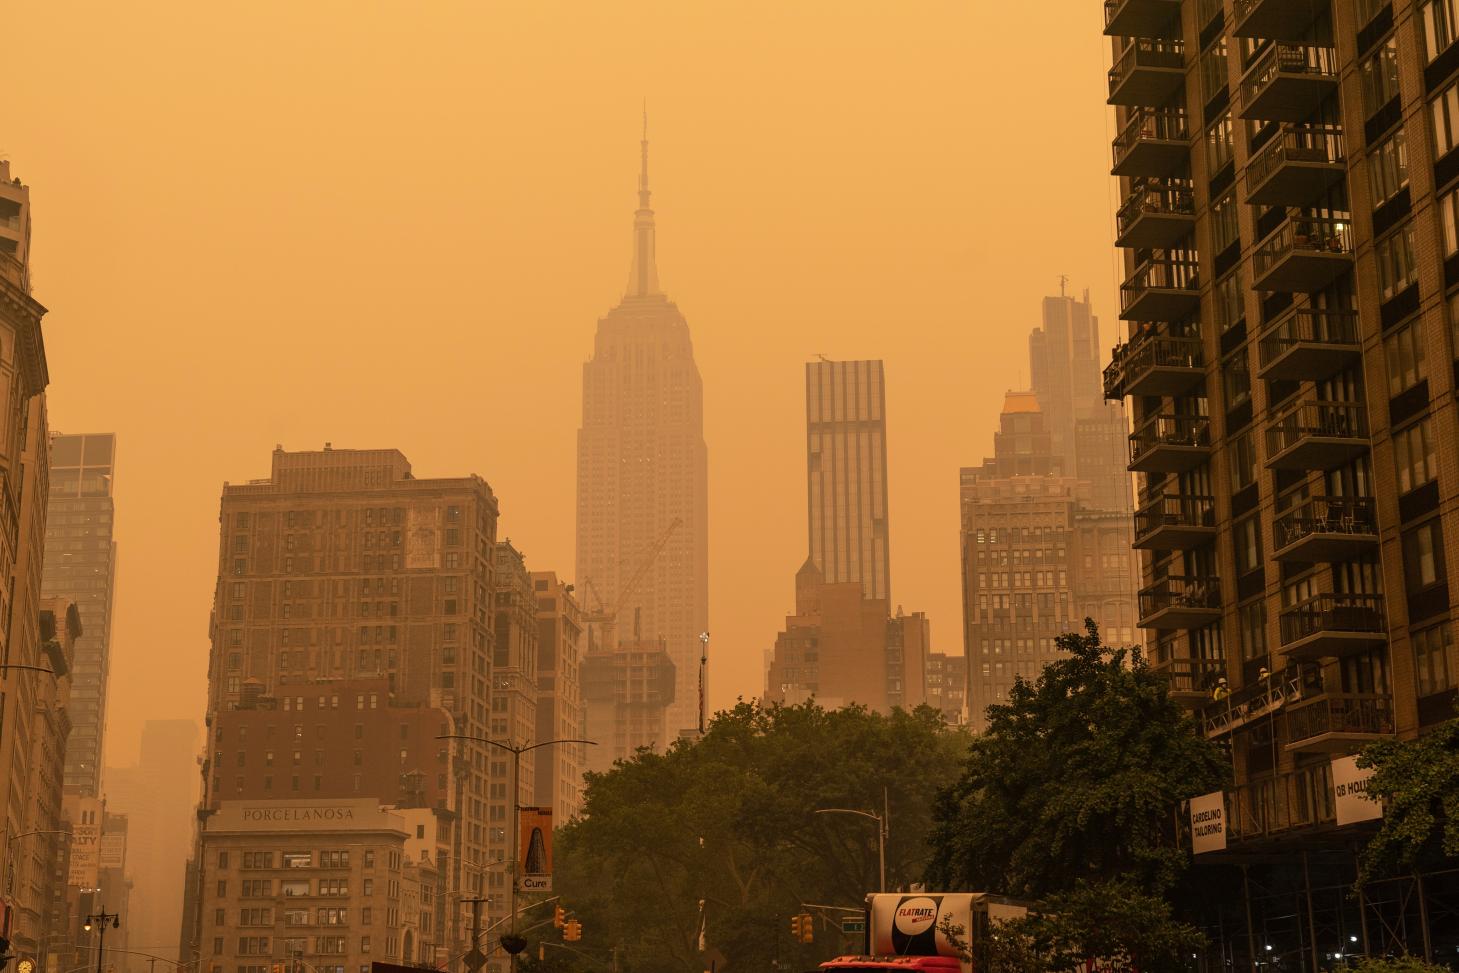 Smoke from wildfires blanketed cities many places across the Northeast and Midwest this week, leading to air quality at unhealthy levels in many regions and turning skies orange.